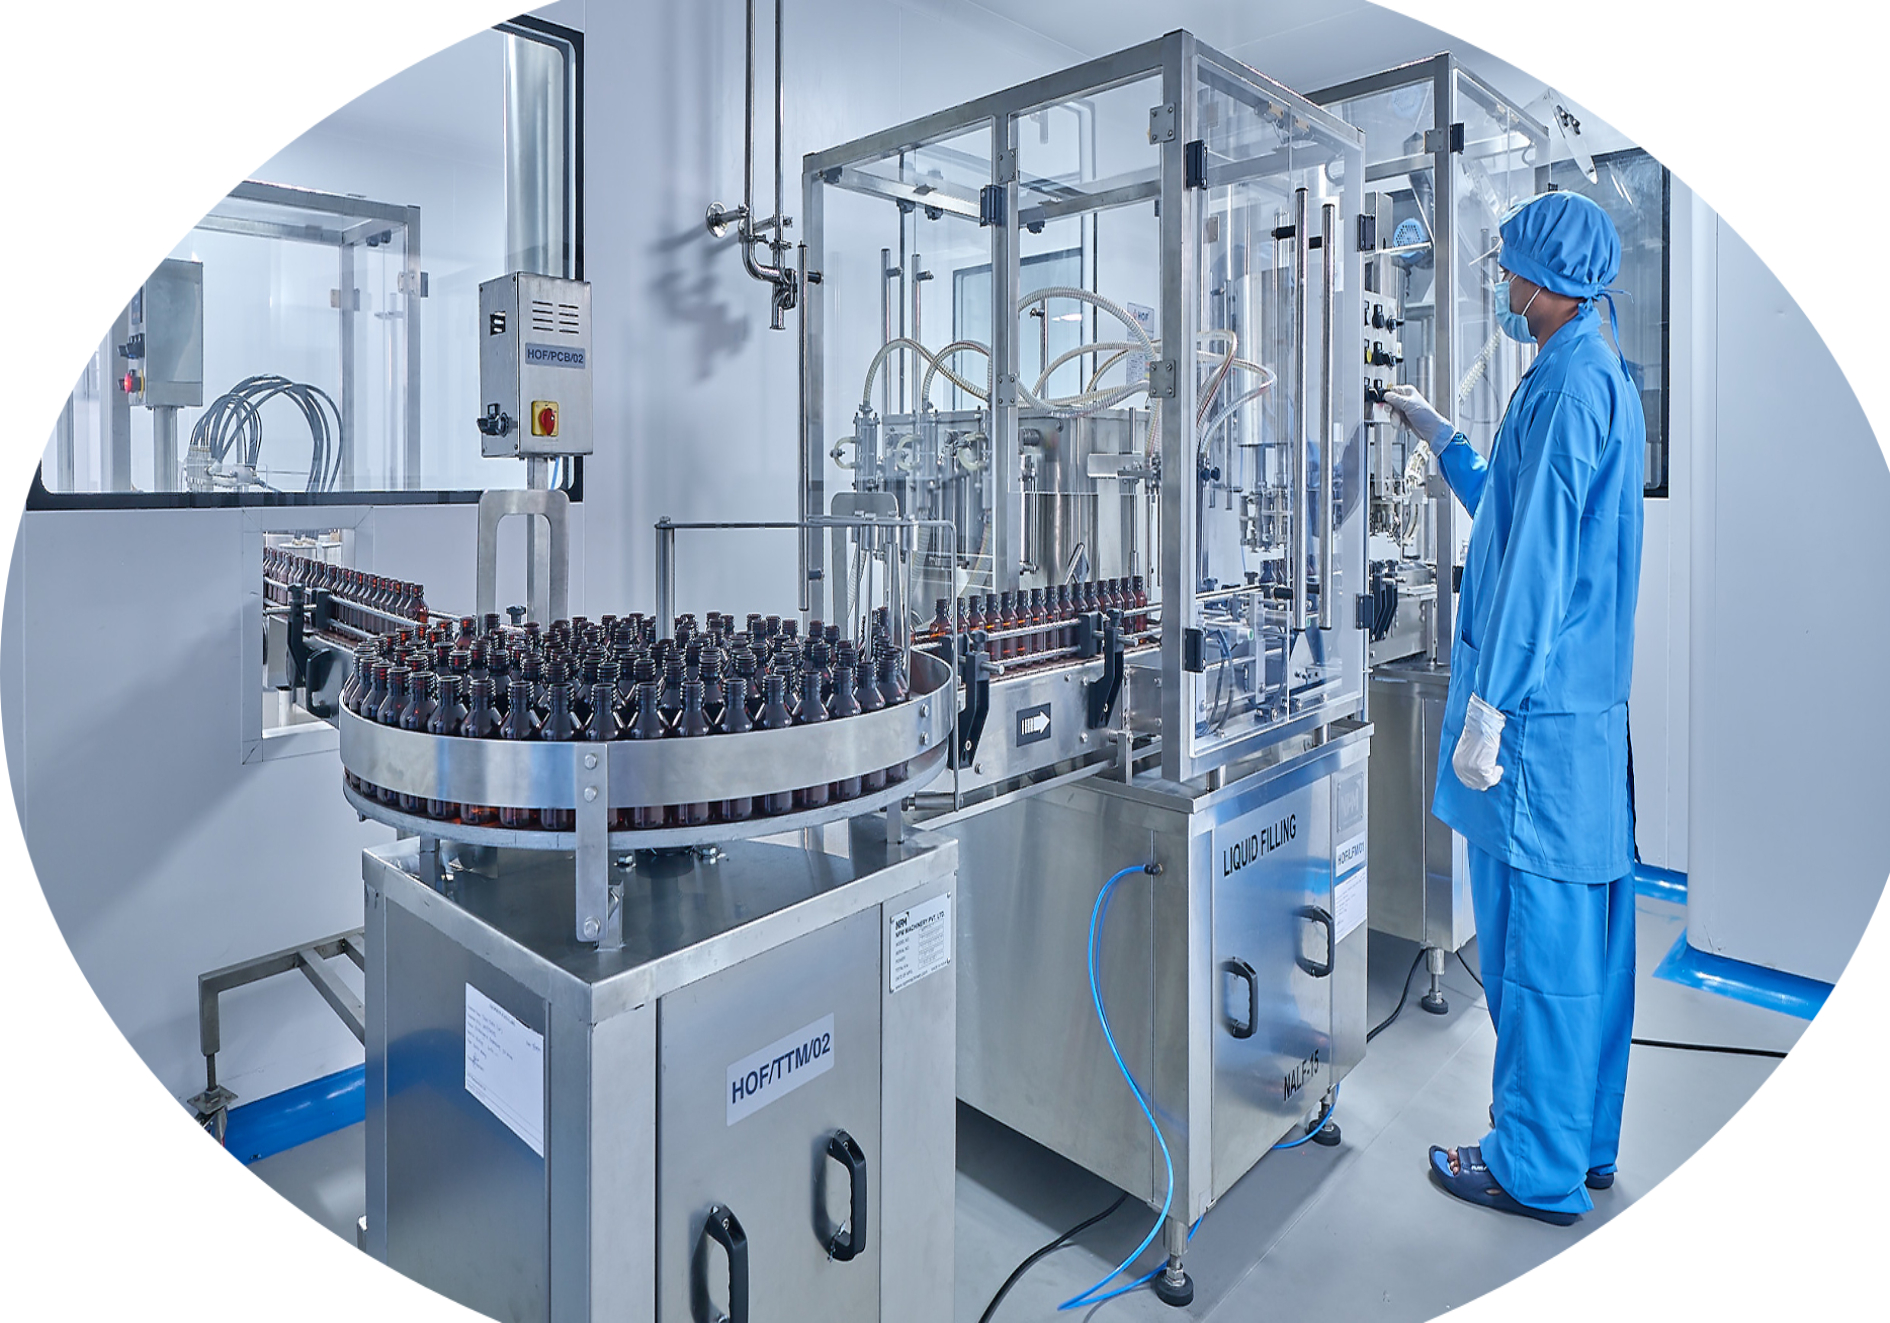 pharmaceutical third party manufacturing